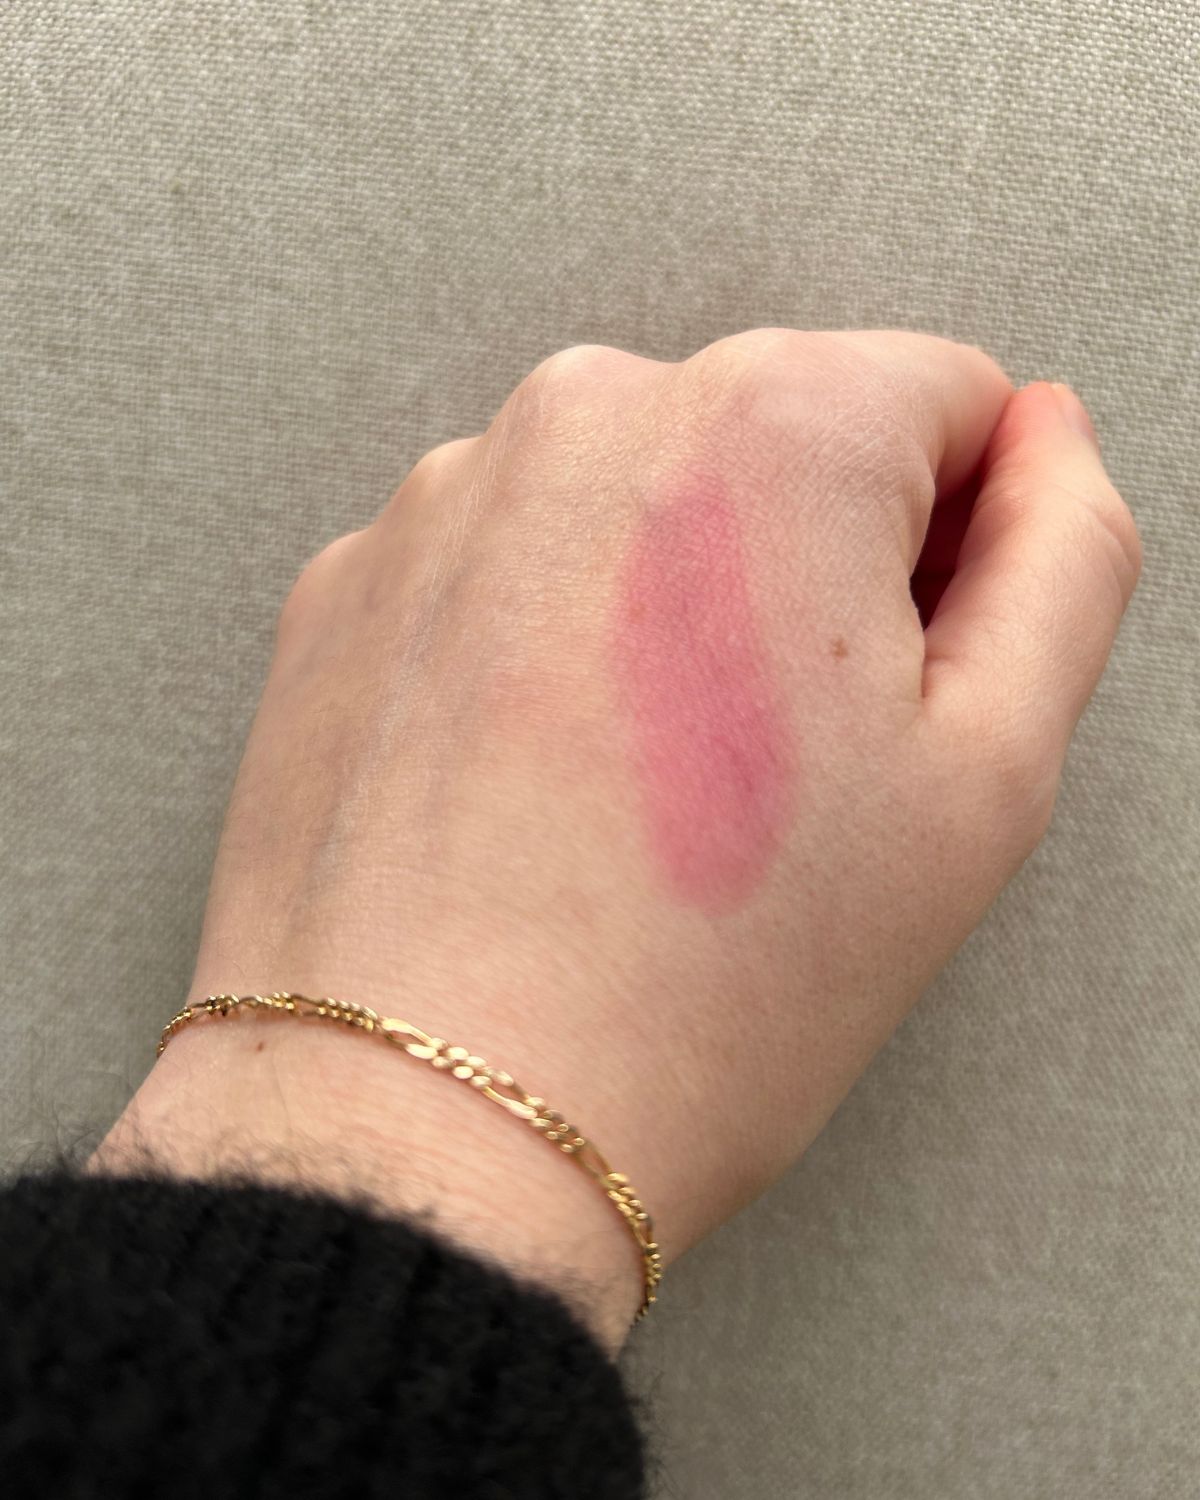 a swatch of the milk makeup cooling water jelly tint